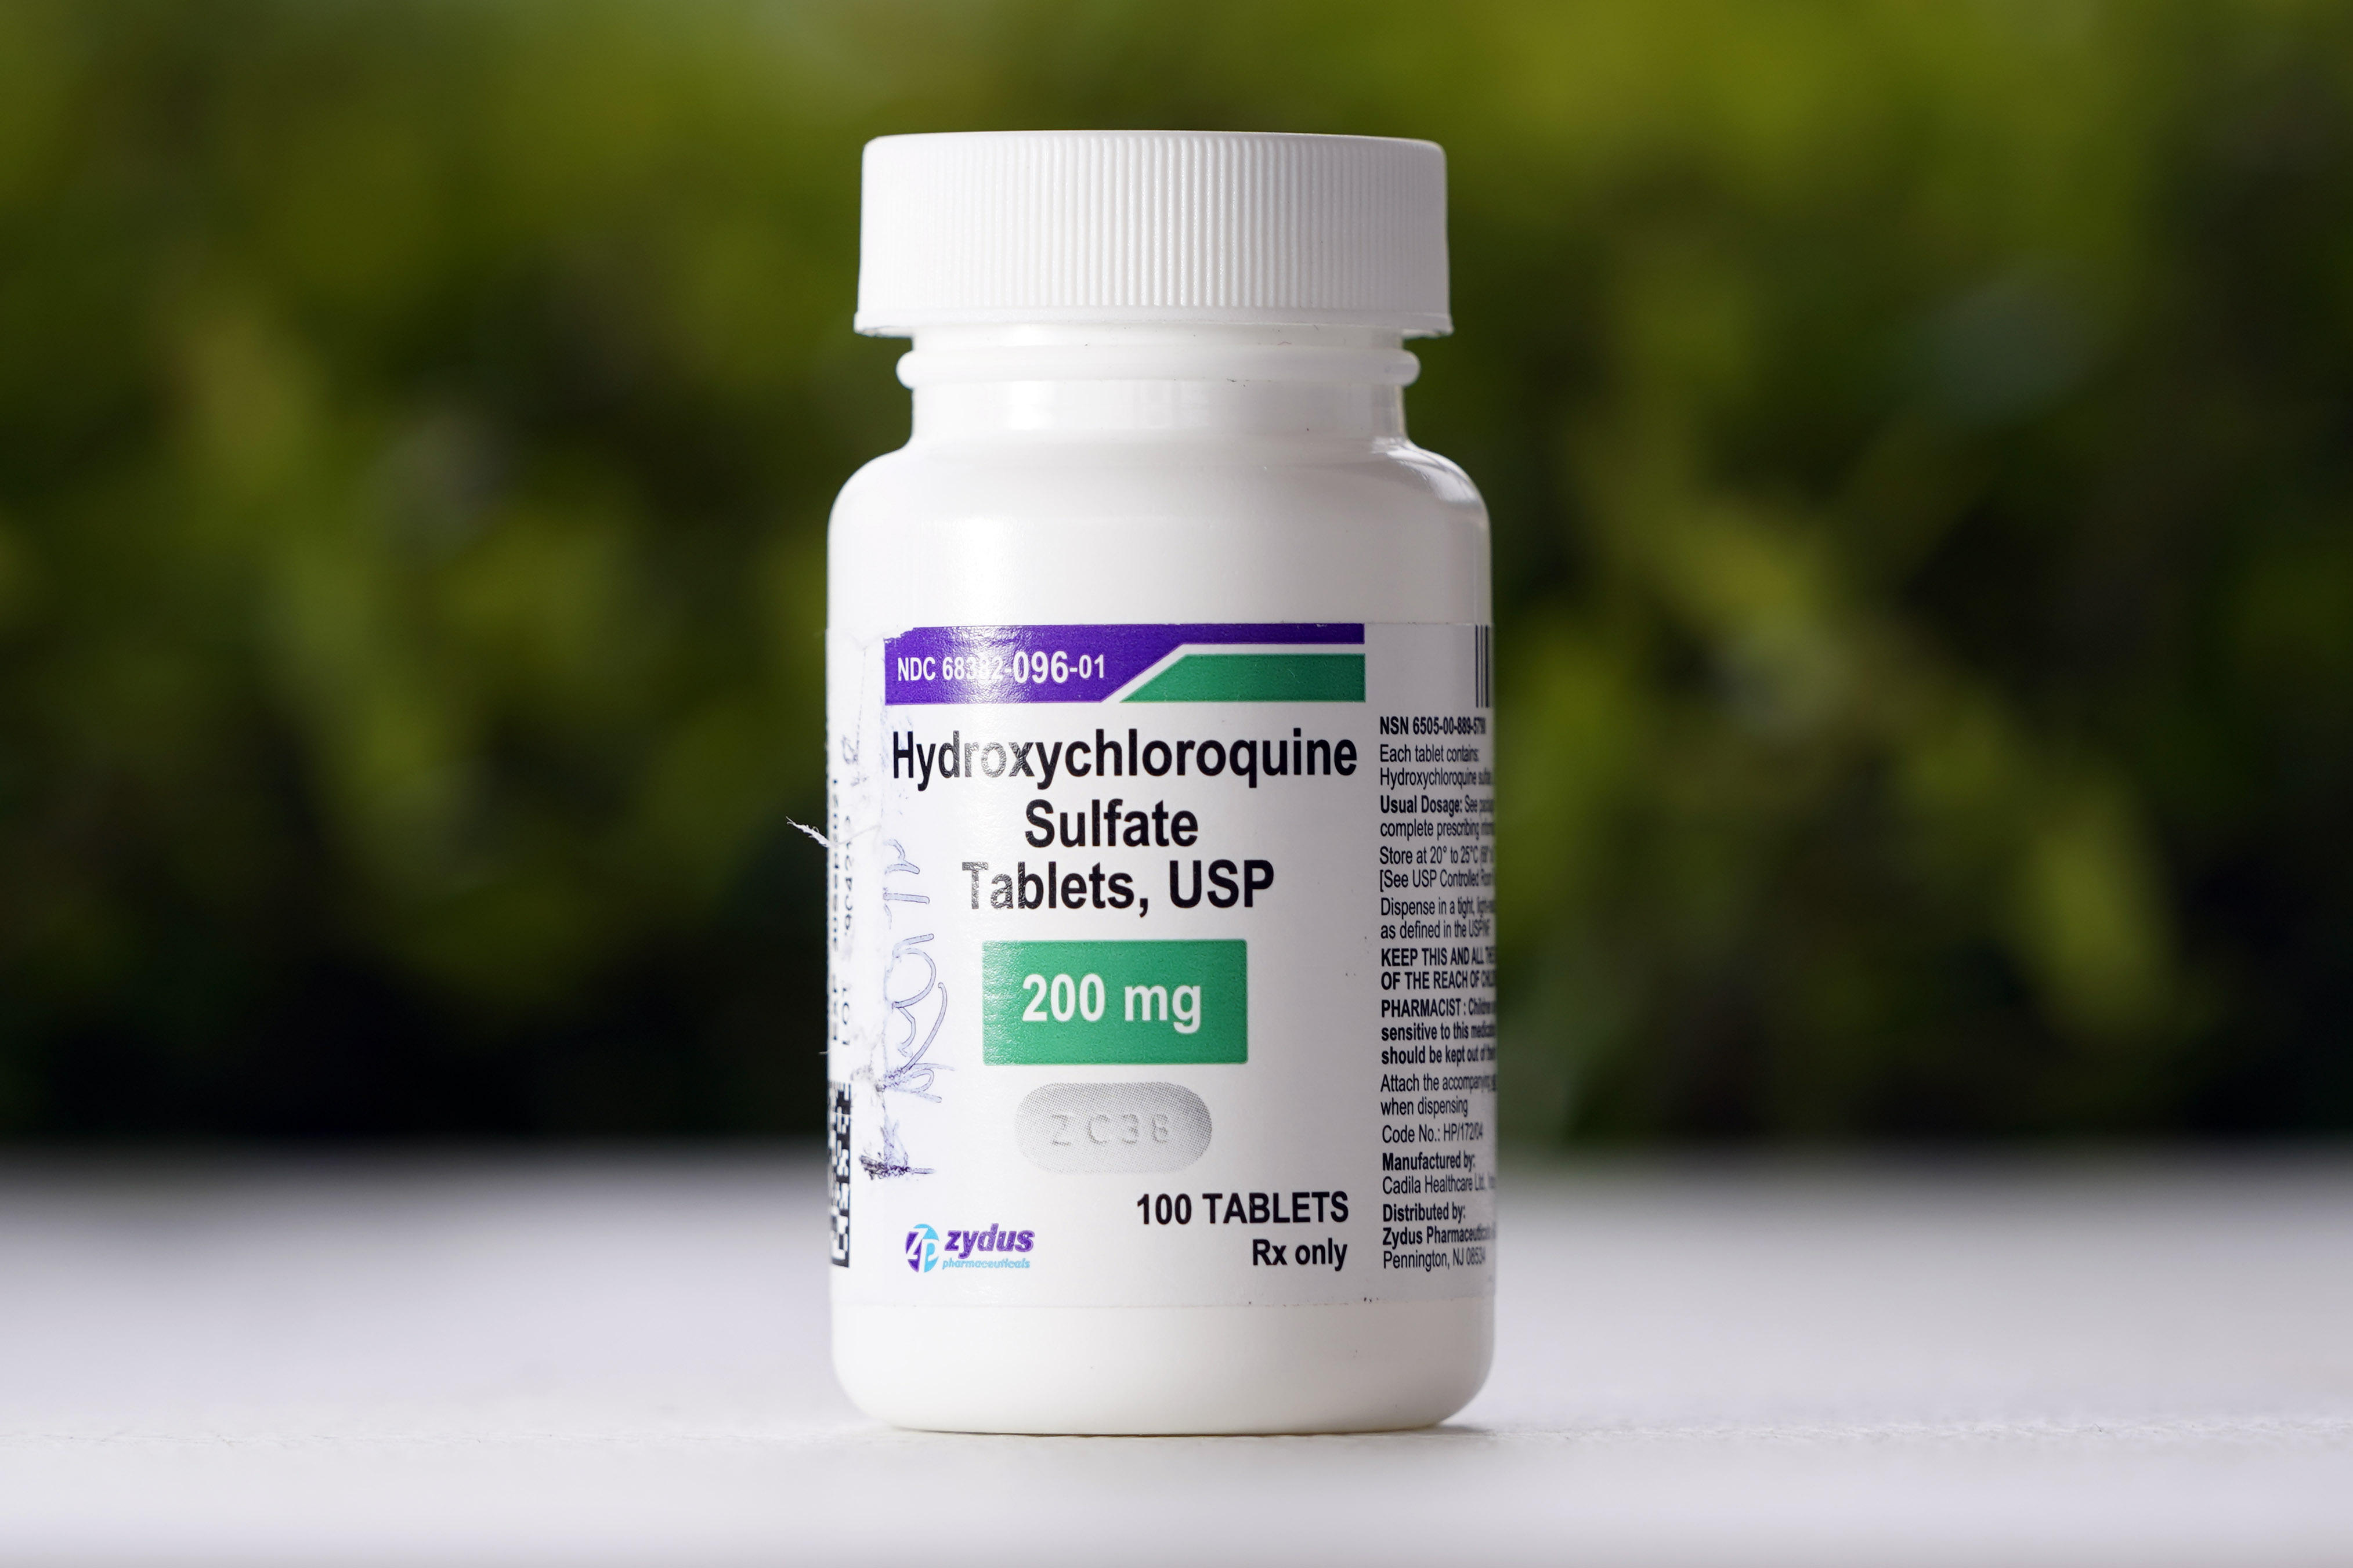 A bottle of hydroxychloroquine tablets in Texas City, Texas. The World Health Organization said Monday May 25, 2020, that it will temporarily drop hydroxychloroquine from its global study into experimental COVID-19 treatments because its experts need to review all available evidence. Photo: AP